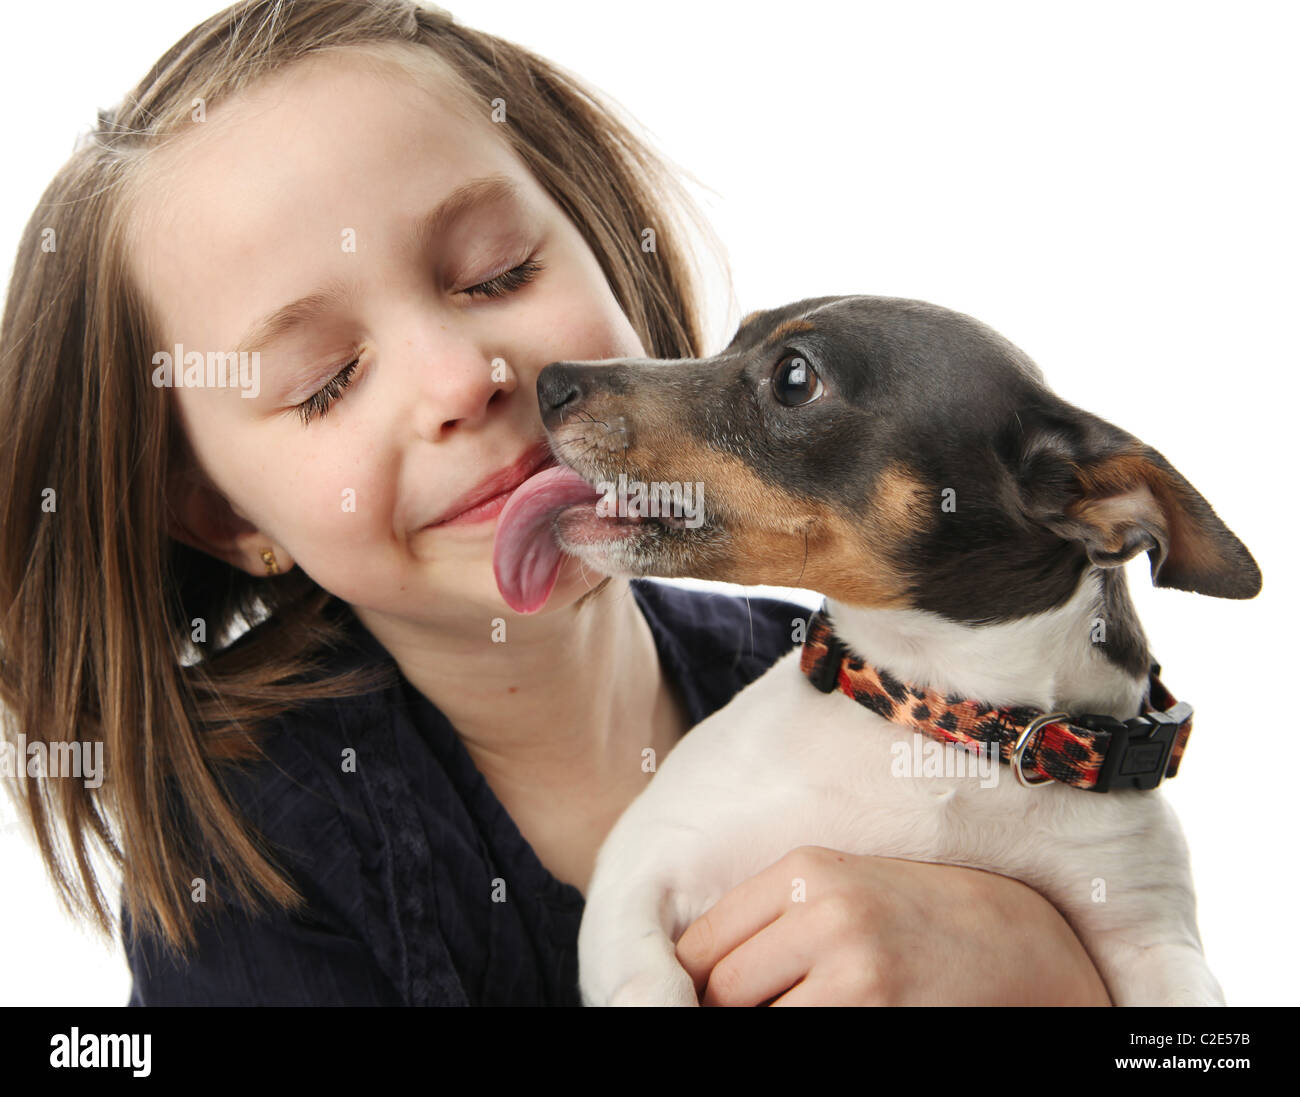 Portrait of a beautiful young girl snuggling with and being licked by a cute terrier puppy dog, isolated on white in studio Stock Photo